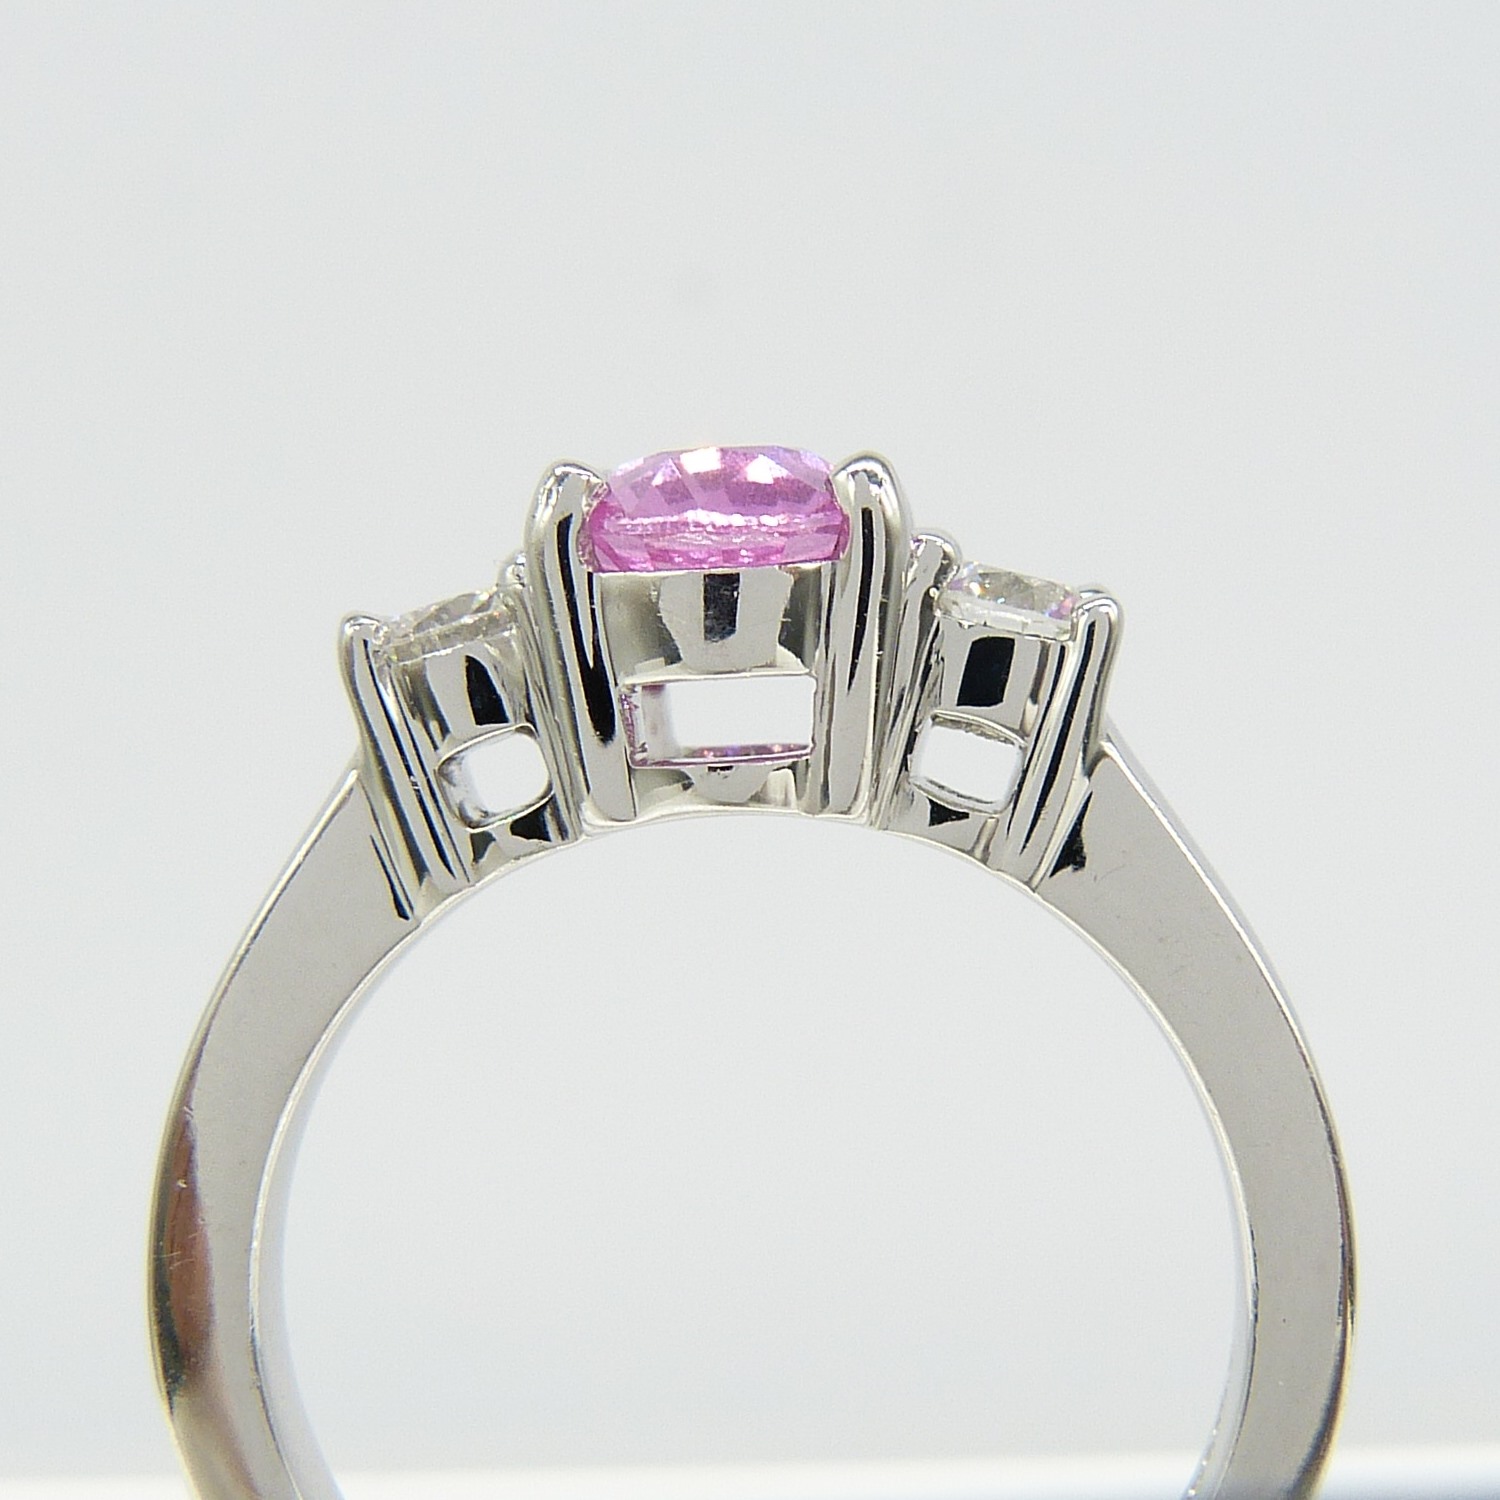 1.50 carat pink sapphire and 0.35 carat diamond 3-stone dress ring in 18ct white gold - Image 6 of 8